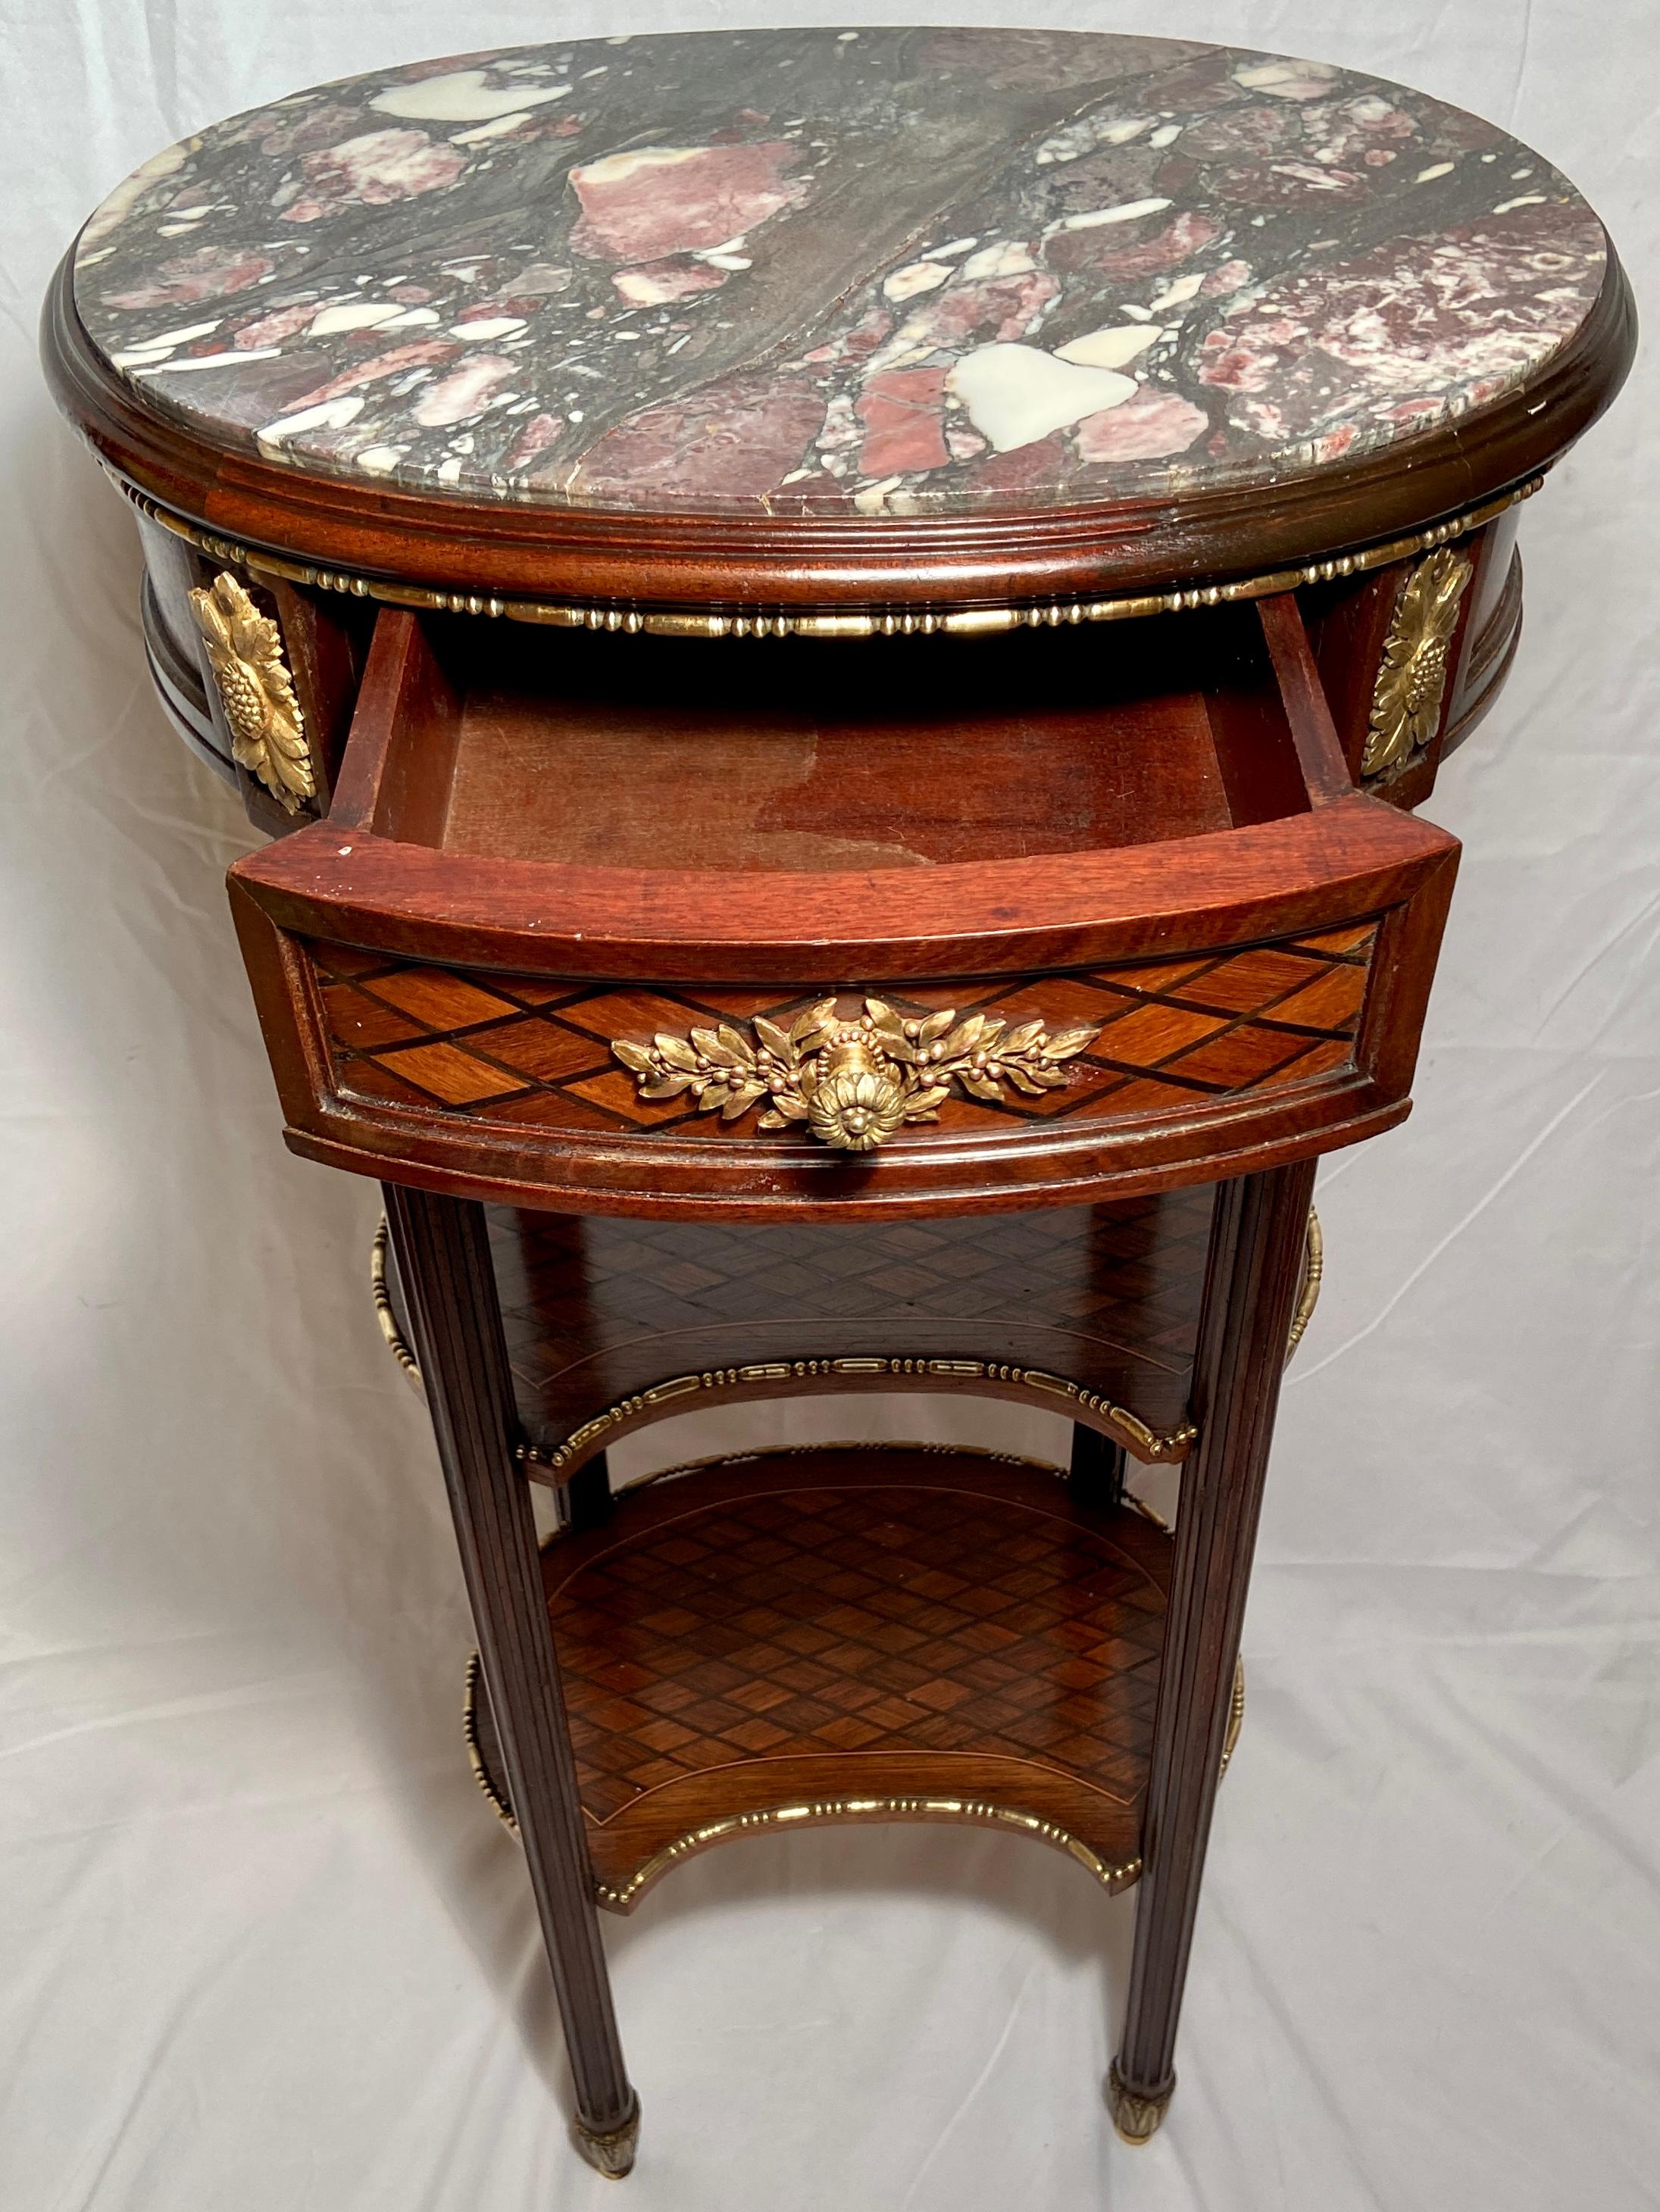 Antique French Louis XVI Marble-Top Occasional Table with Inlay and Ormolu Trim In Good Condition For Sale In New Orleans, LA